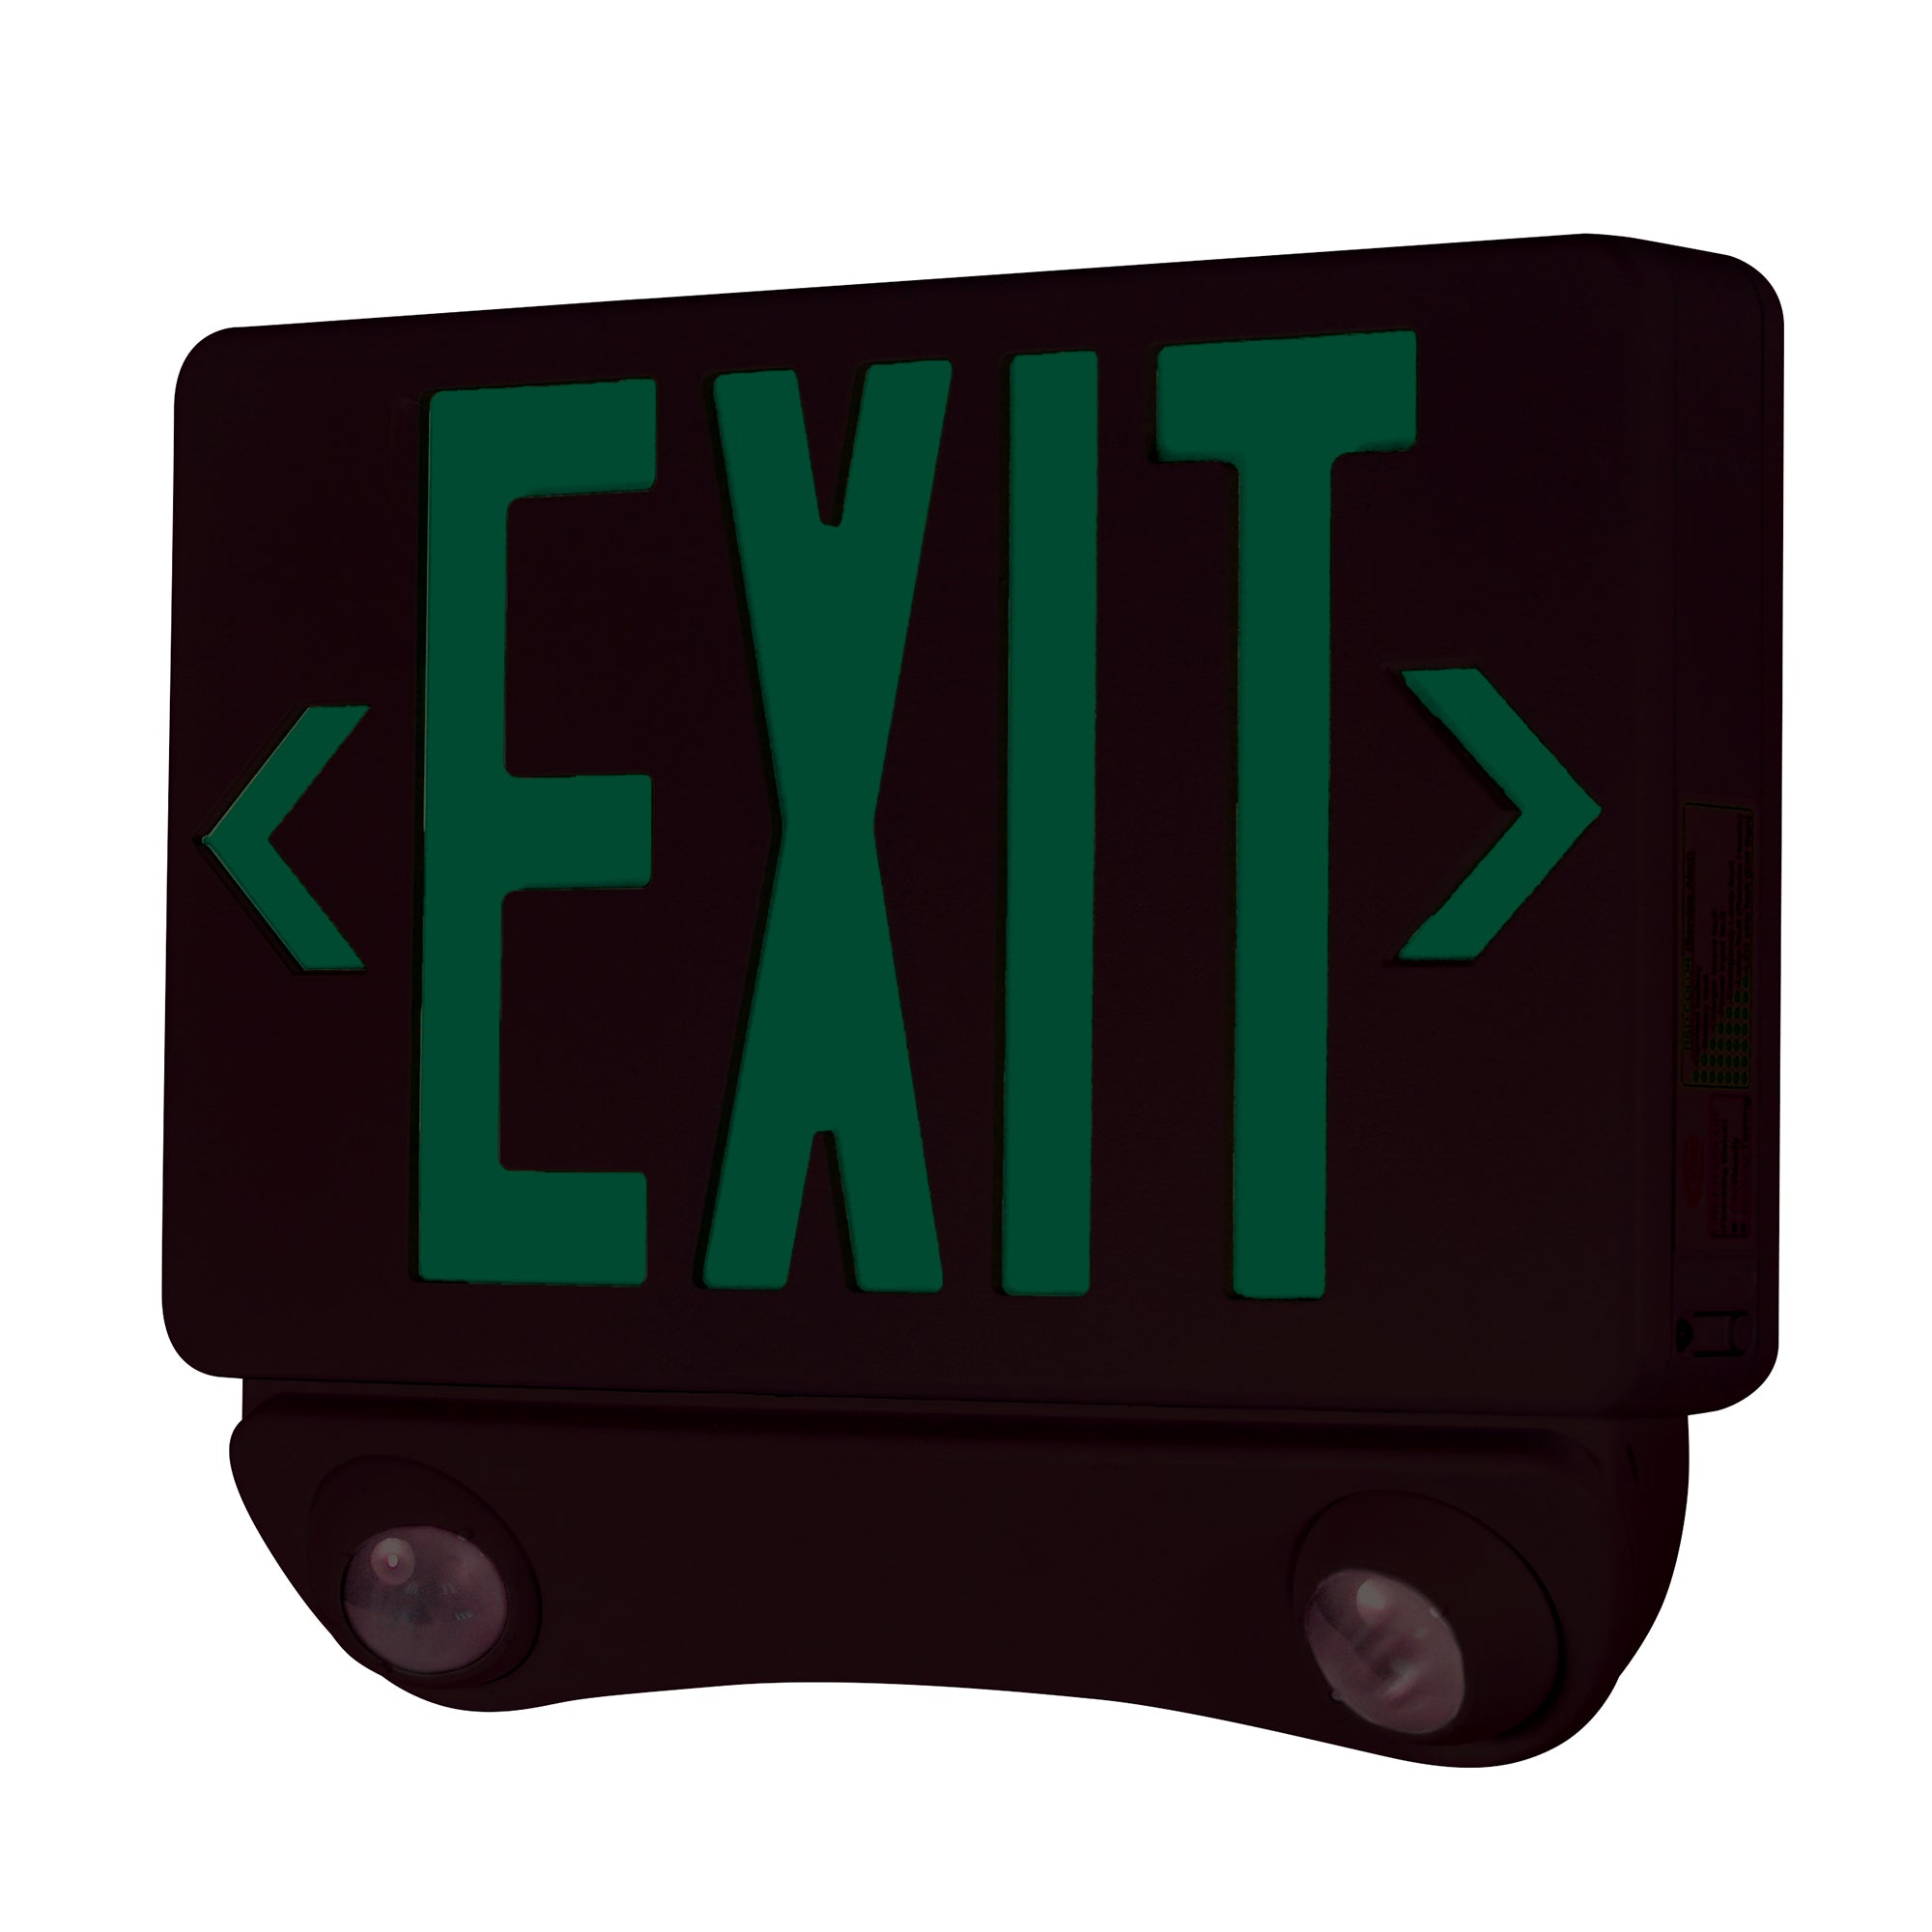 Nora Lighting NEX-730-LED/GB LED Exit and Emergency Combination With Adjustable Heads, Green Letters / Black Housing - Black